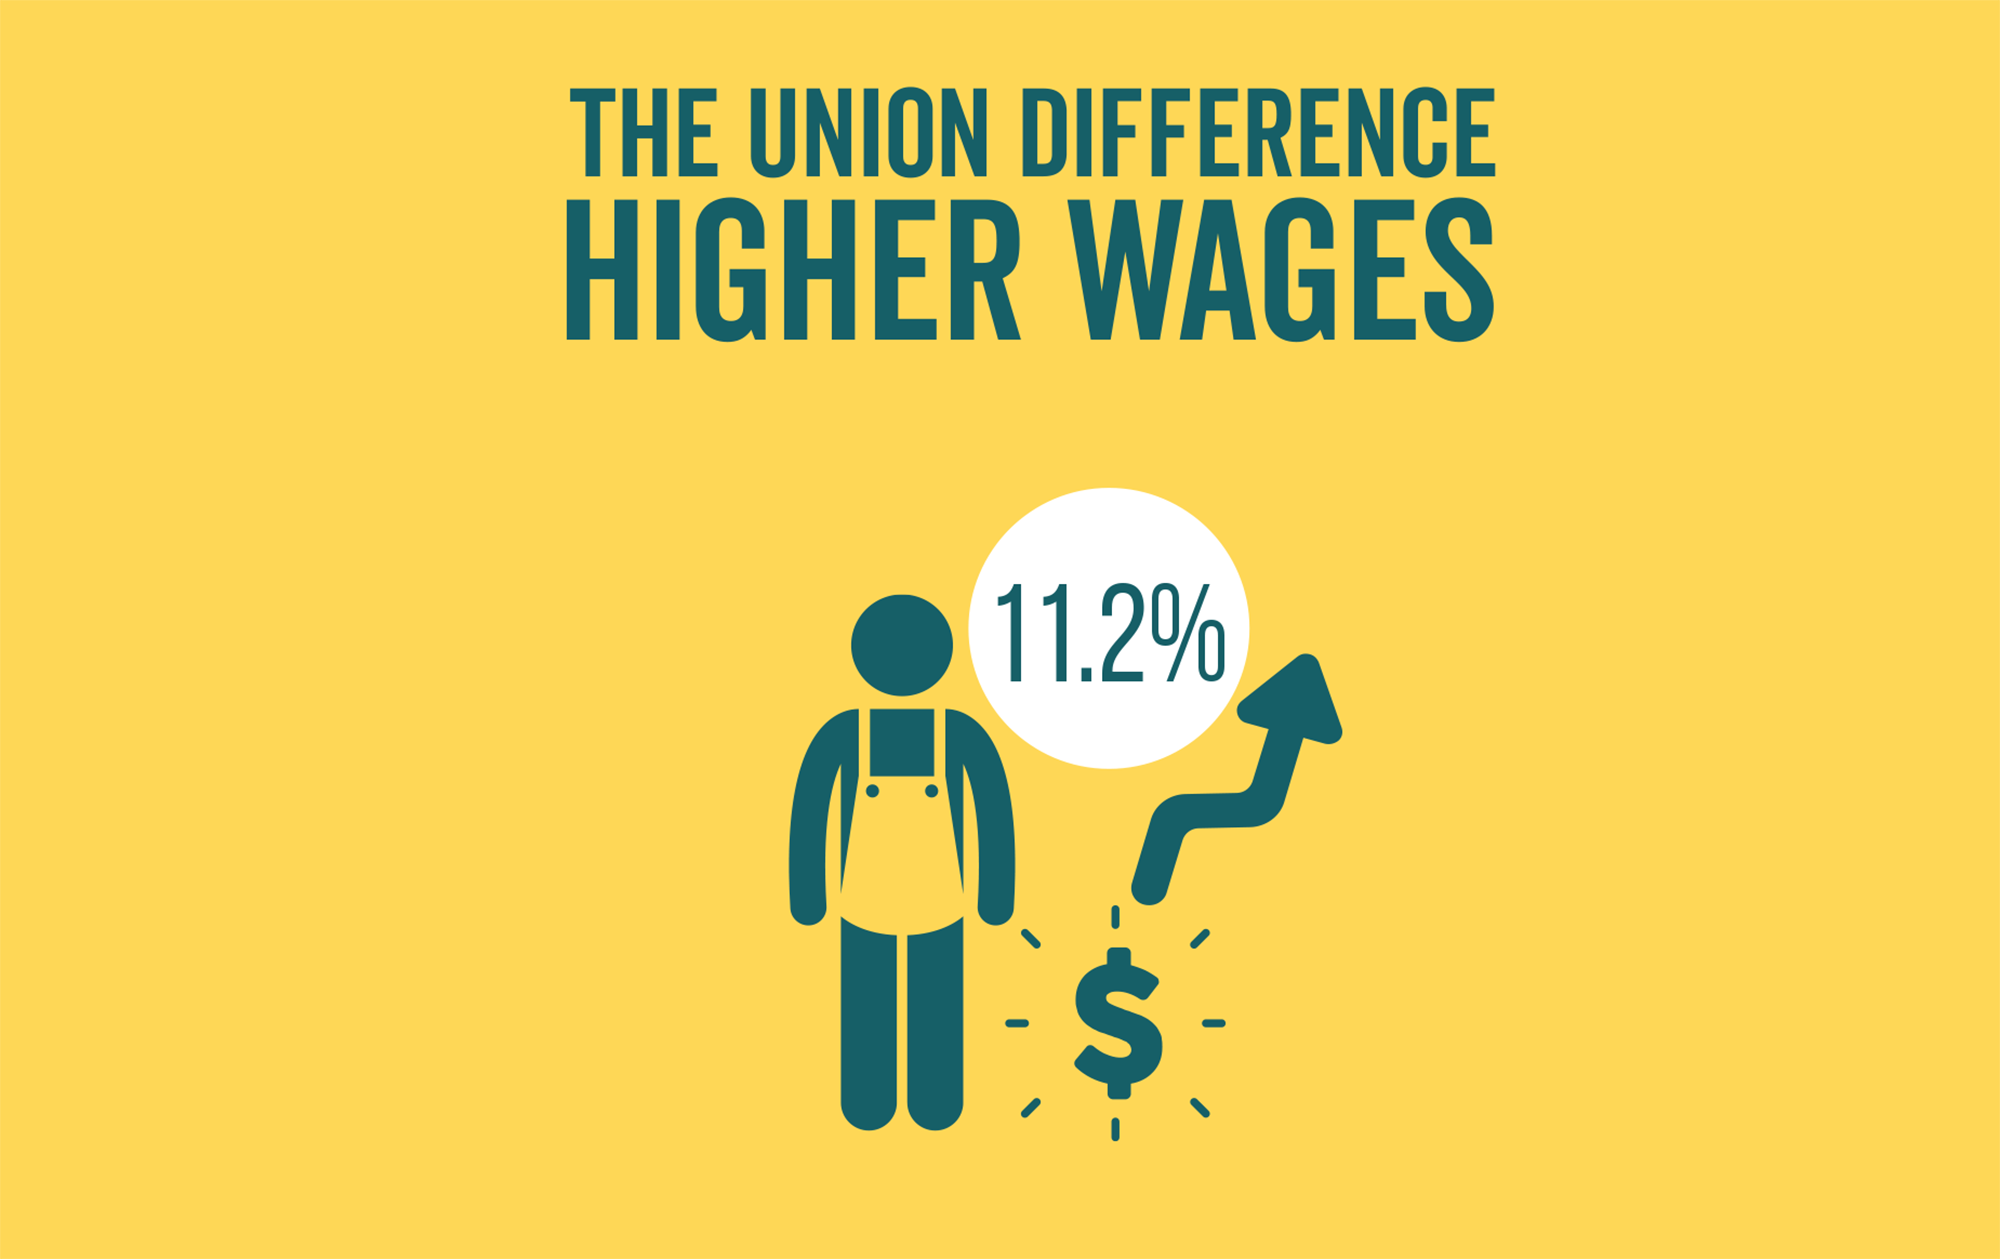 The Union Difference. Union members make an average of 11.2% more than their nonunion counterparts.